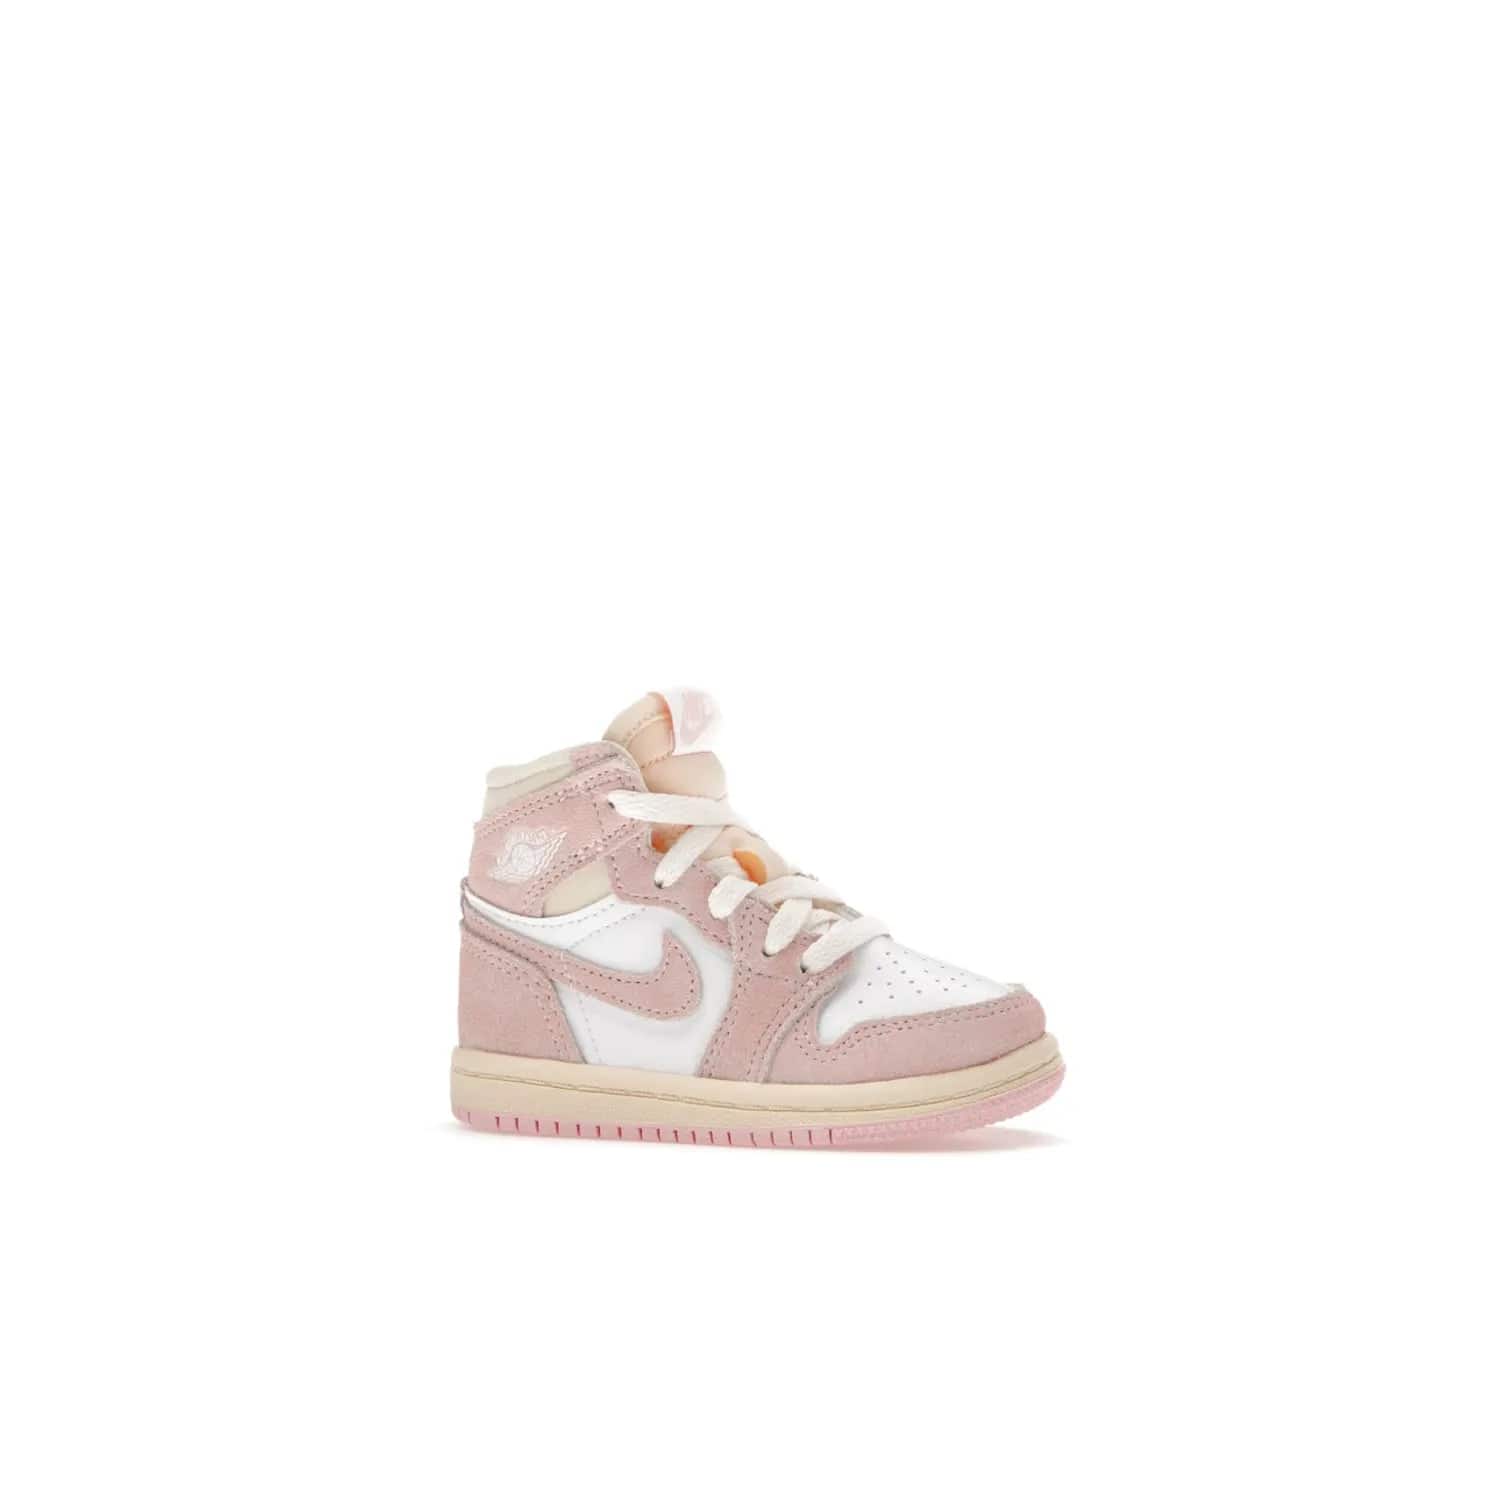 Jordan 1 Retro High OG Washed Pink (TD) - Image 3 - Only at www.BallersClubKickz.com - Retro style meets modern comfort: Introducing the Jordan 1 High OG Washed Pink (TD). Combining Atmosphere/White/Muslin/Sail colors with a high-rise silhouette, these shoes will be an instant classic when they release April 22, 2023.